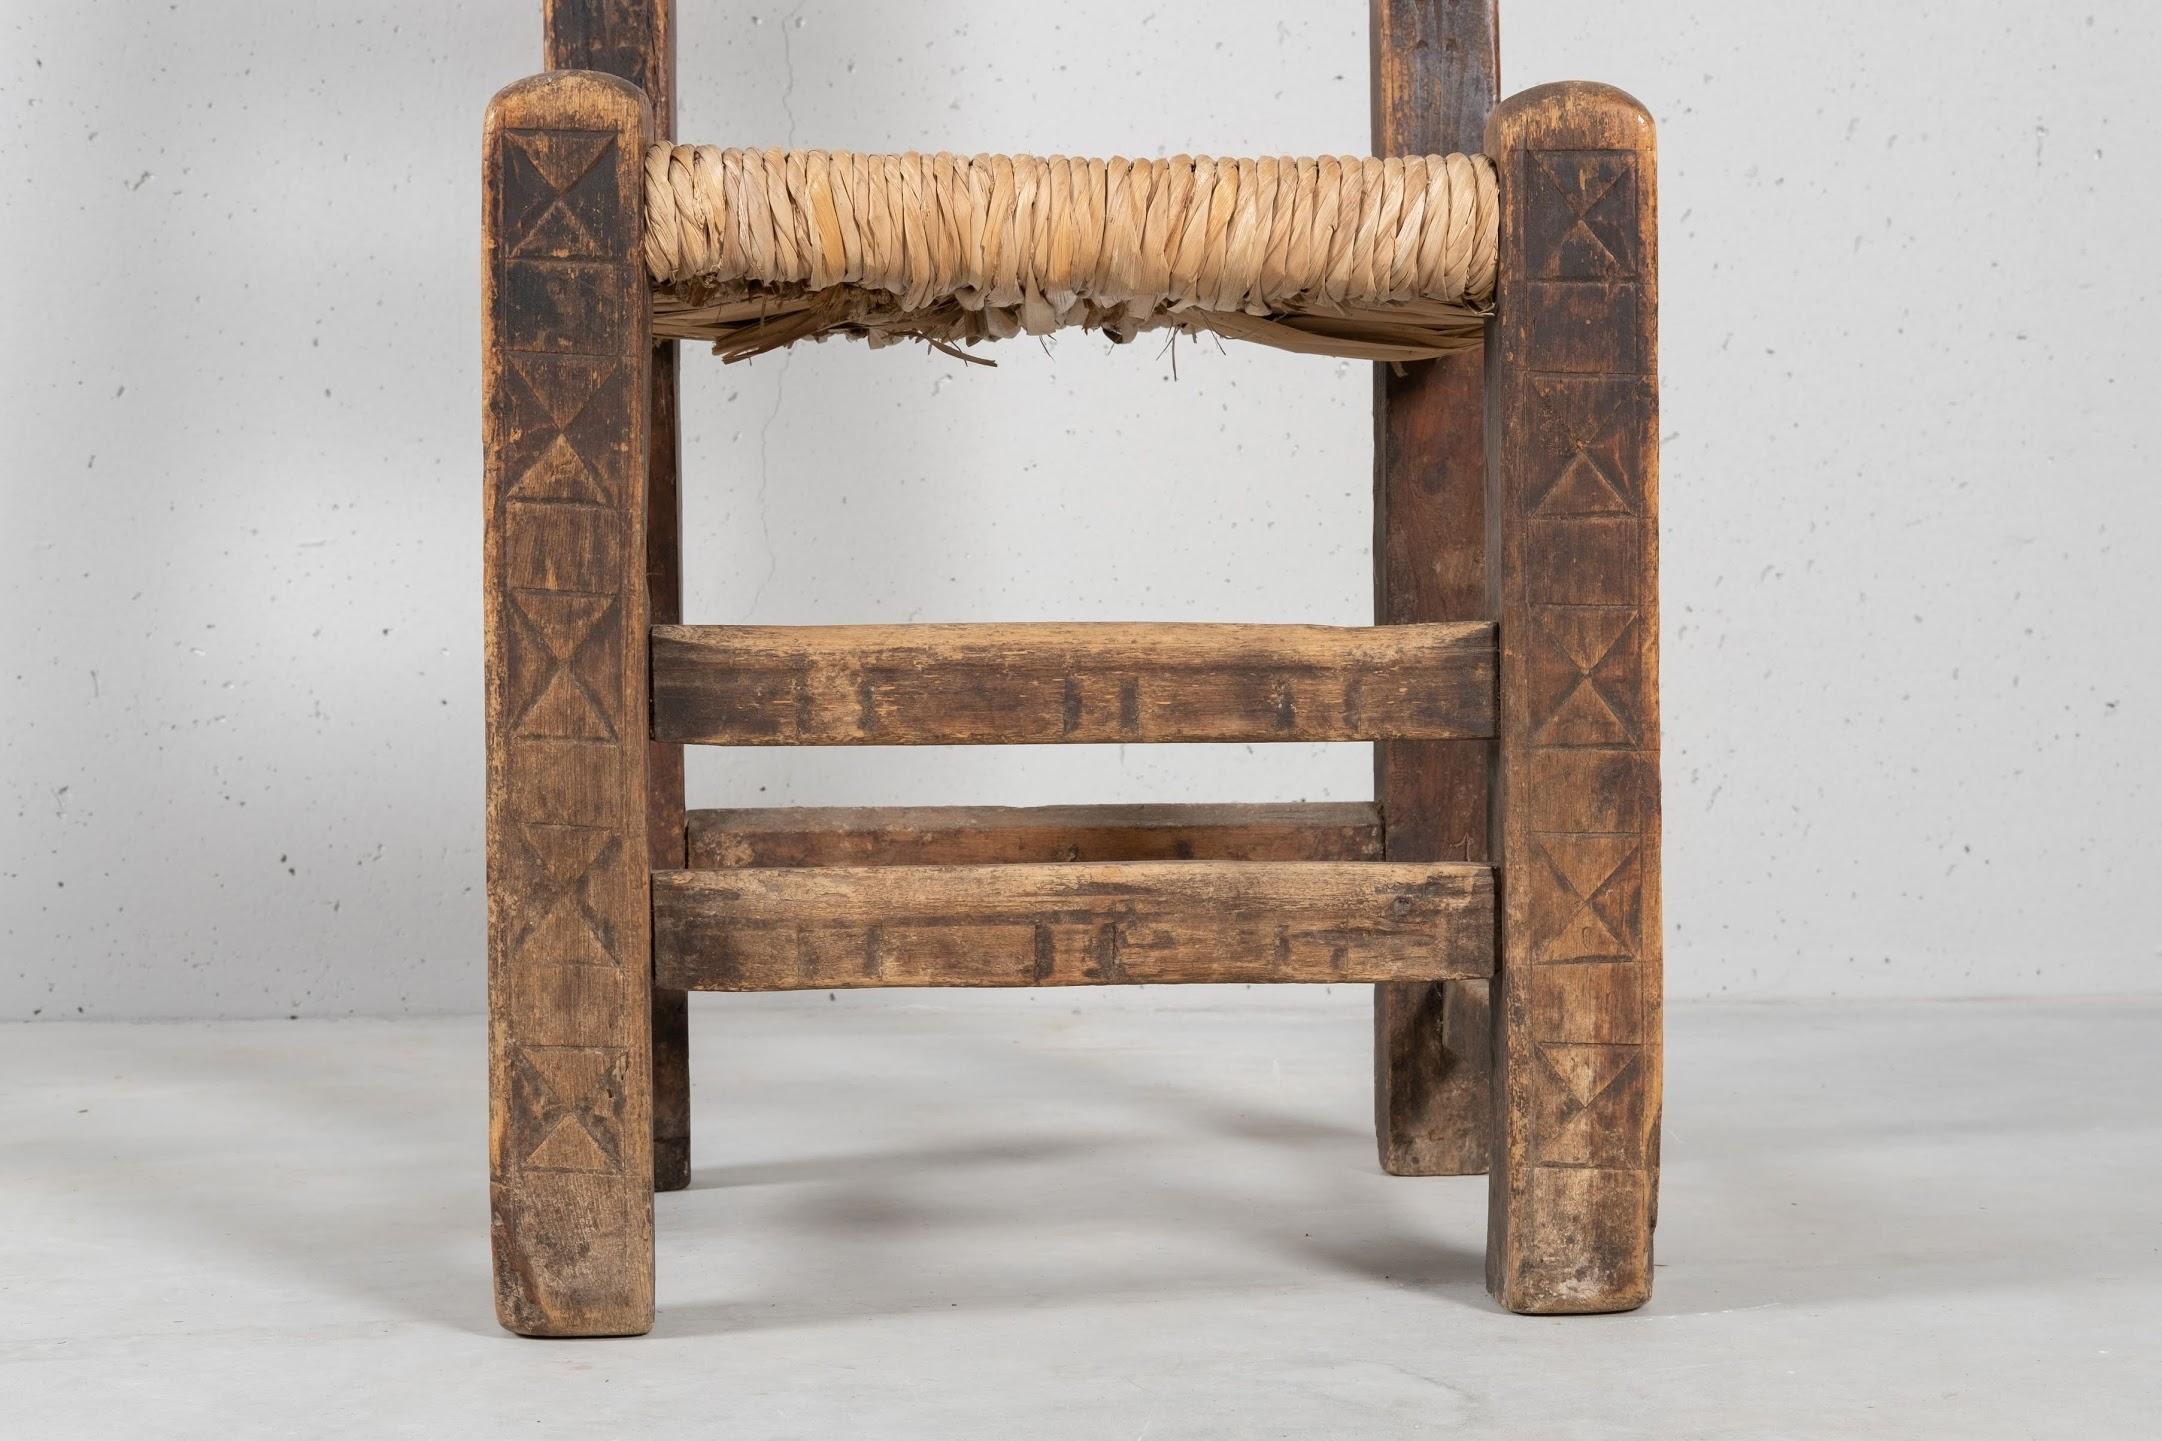 Poplar Straw-Bottom Chair, East Europe, Early 1800 For Sale 3